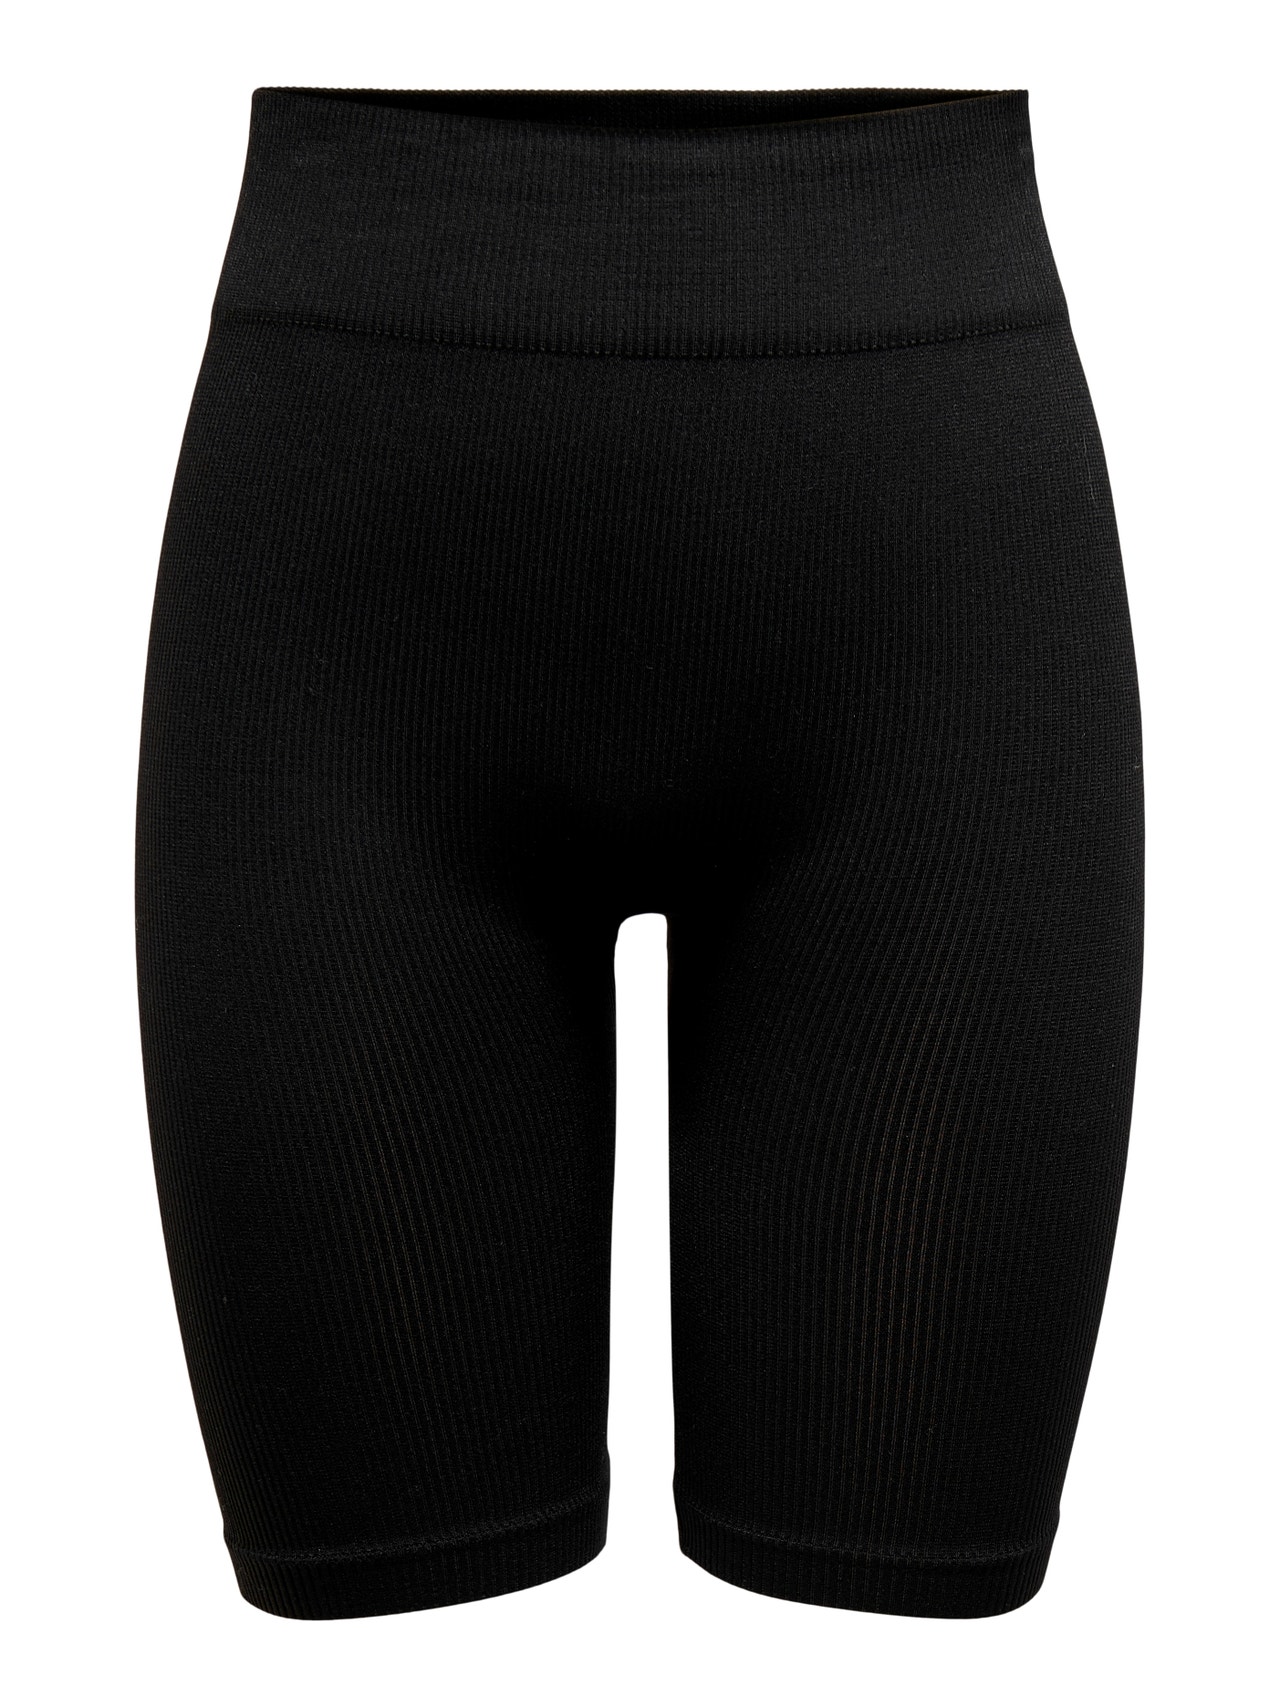 ONLY Seamless Sports shorts -Black - 15253714